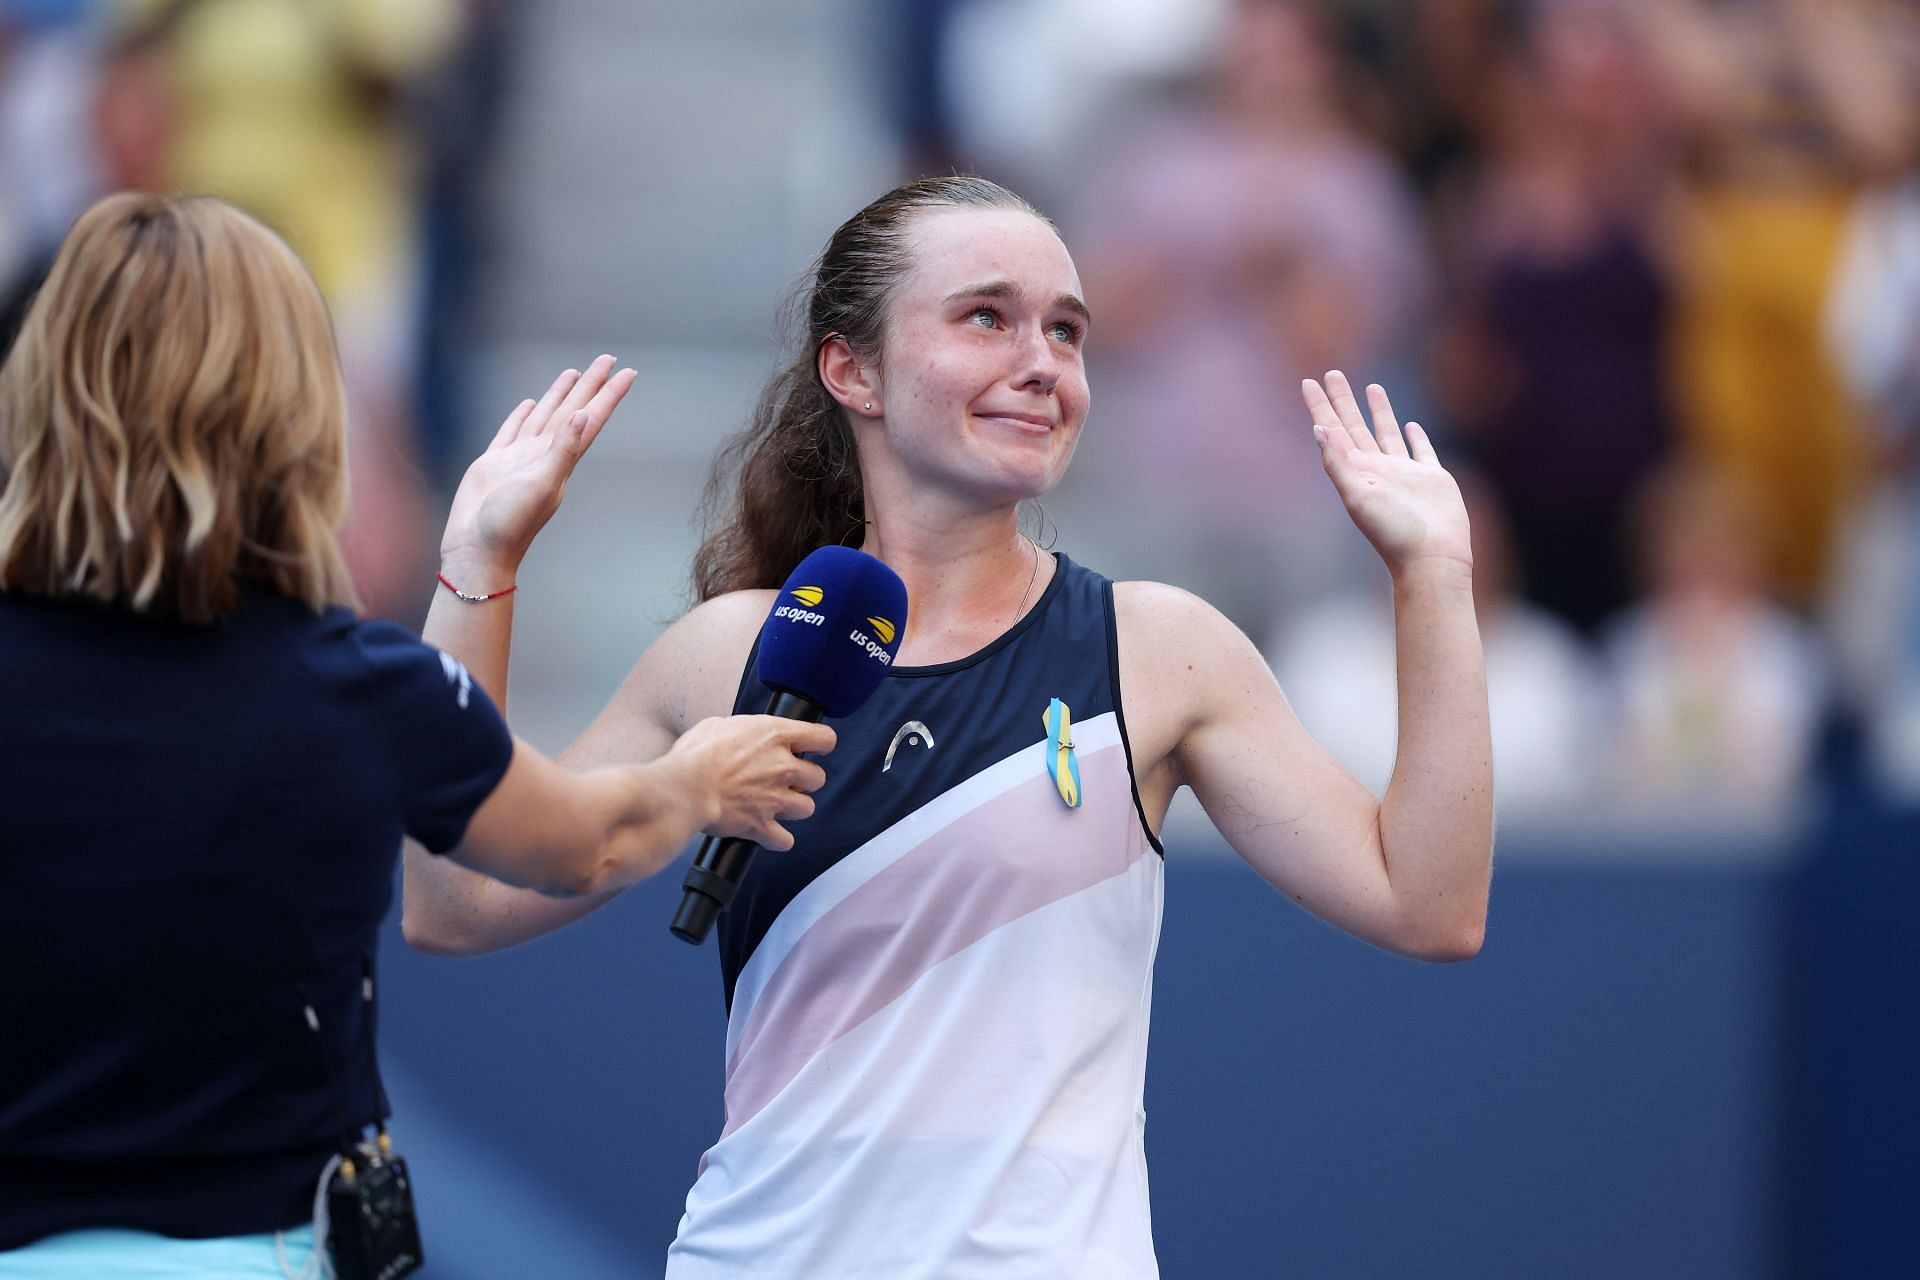 Daria Snigur pulled off the upset of the US Open by beating Simona Halep in the first round